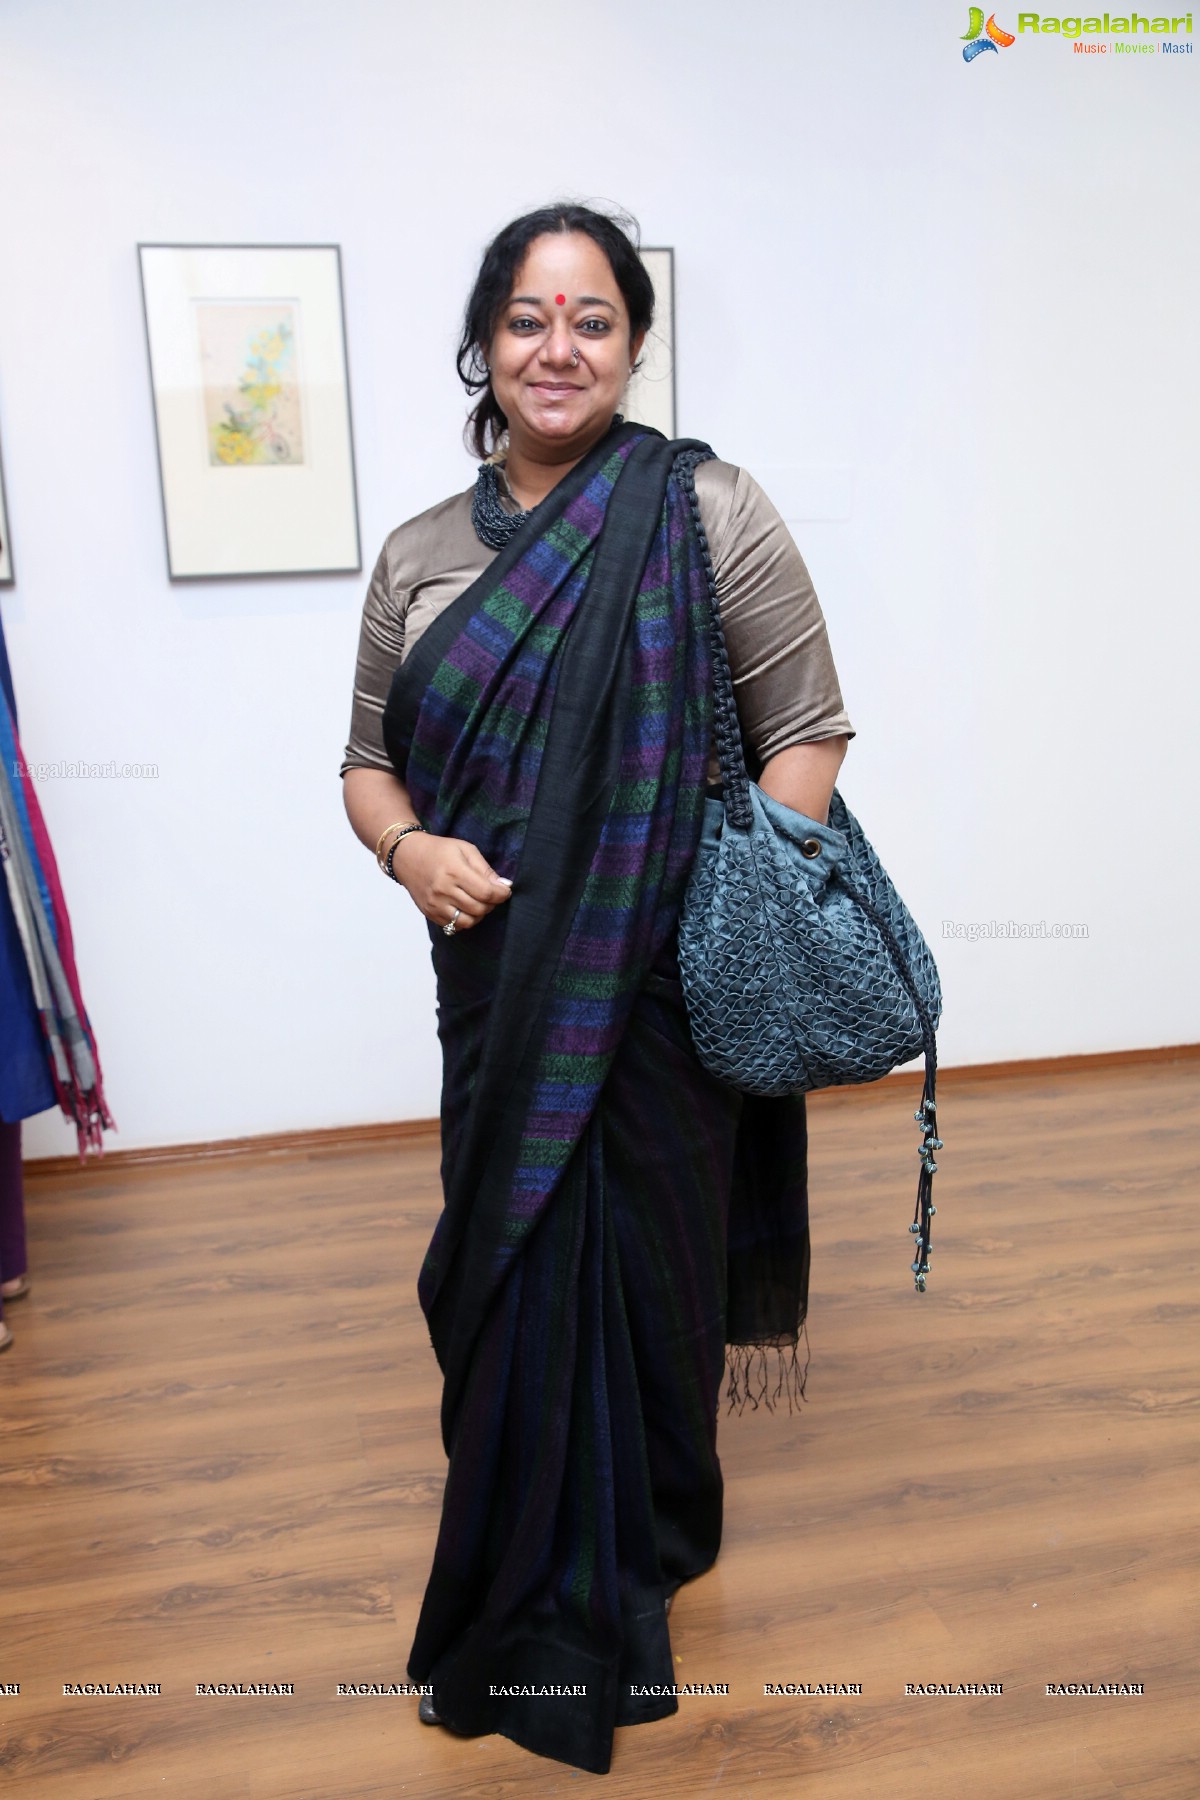 'Like The Air I Breathe’ - Painting Exhibition at Kalakriti Art Gallery